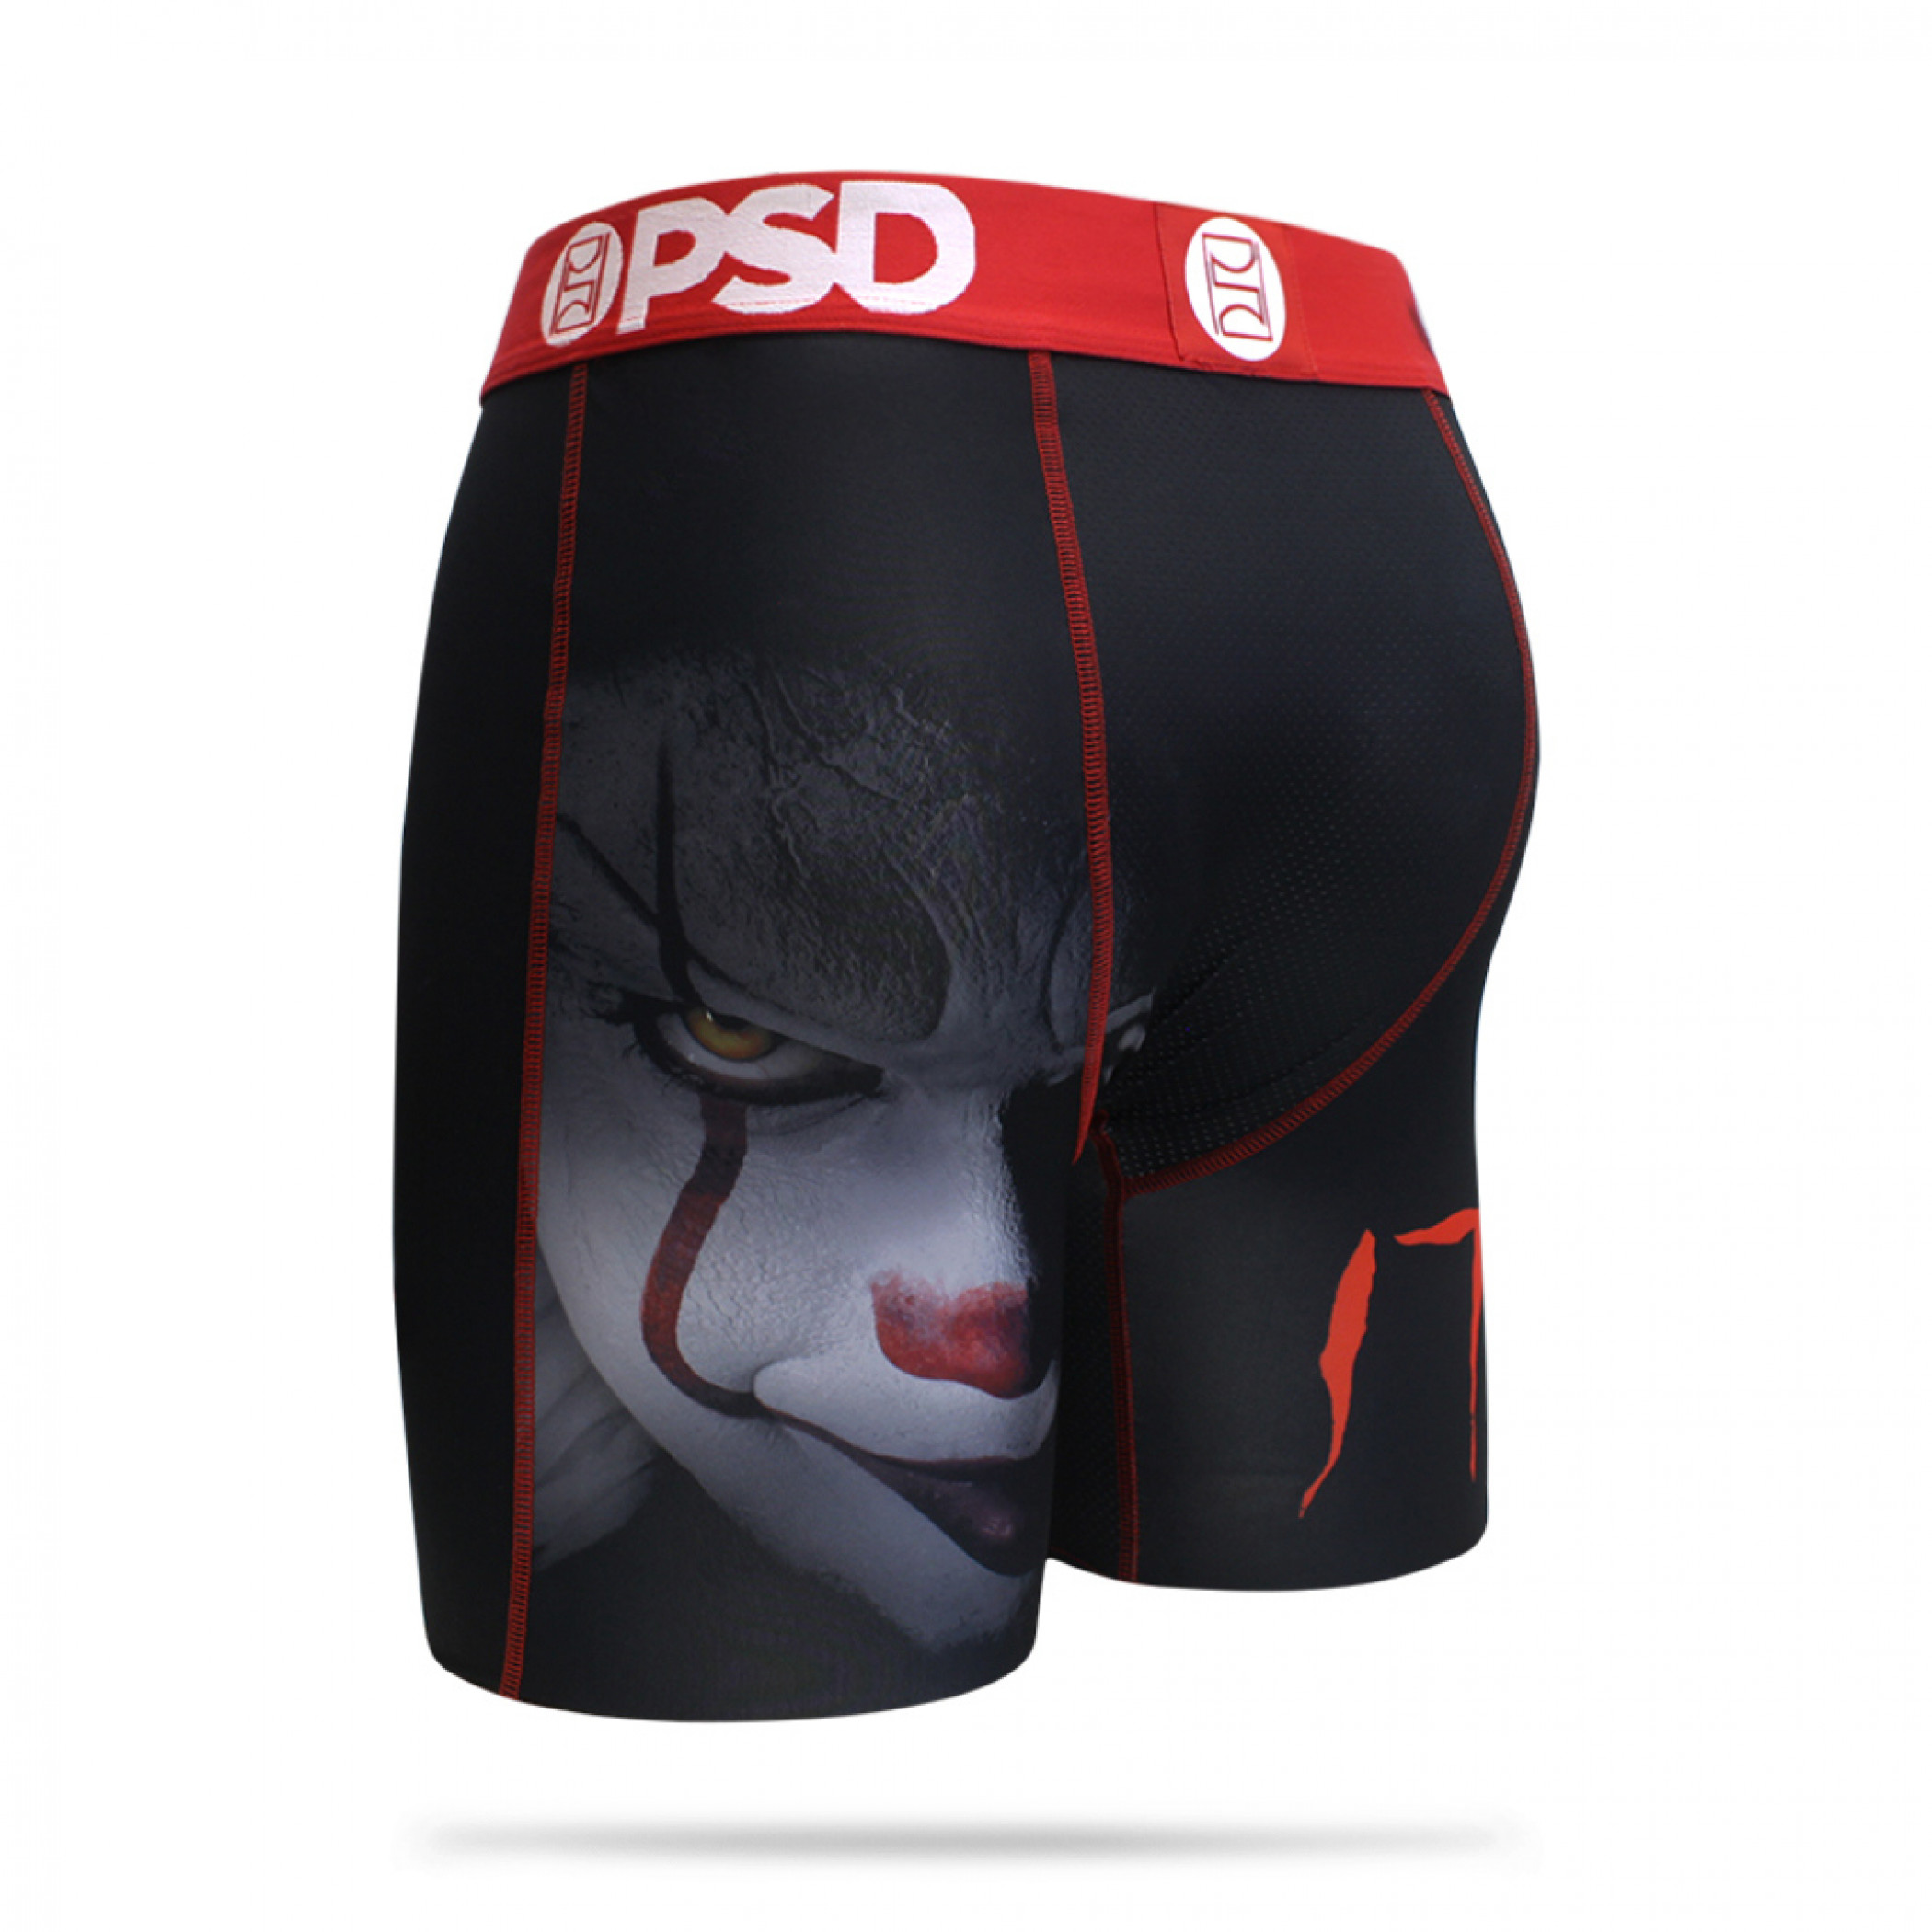 IT Pennywise the Clown PSD Boxers Briefs